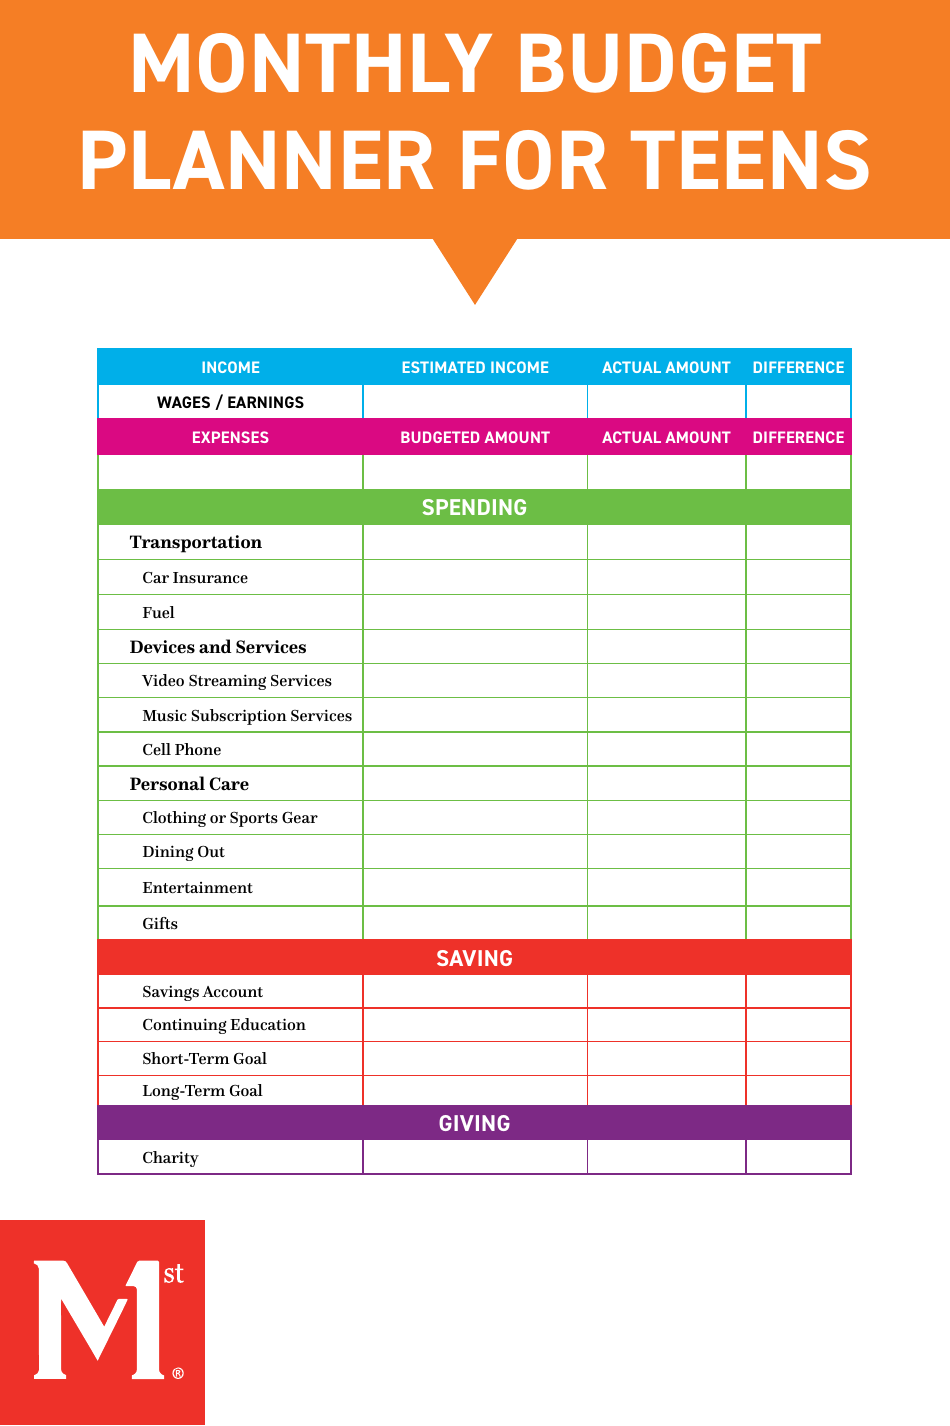 Monthly Budget Planner for Teens - Template Roller